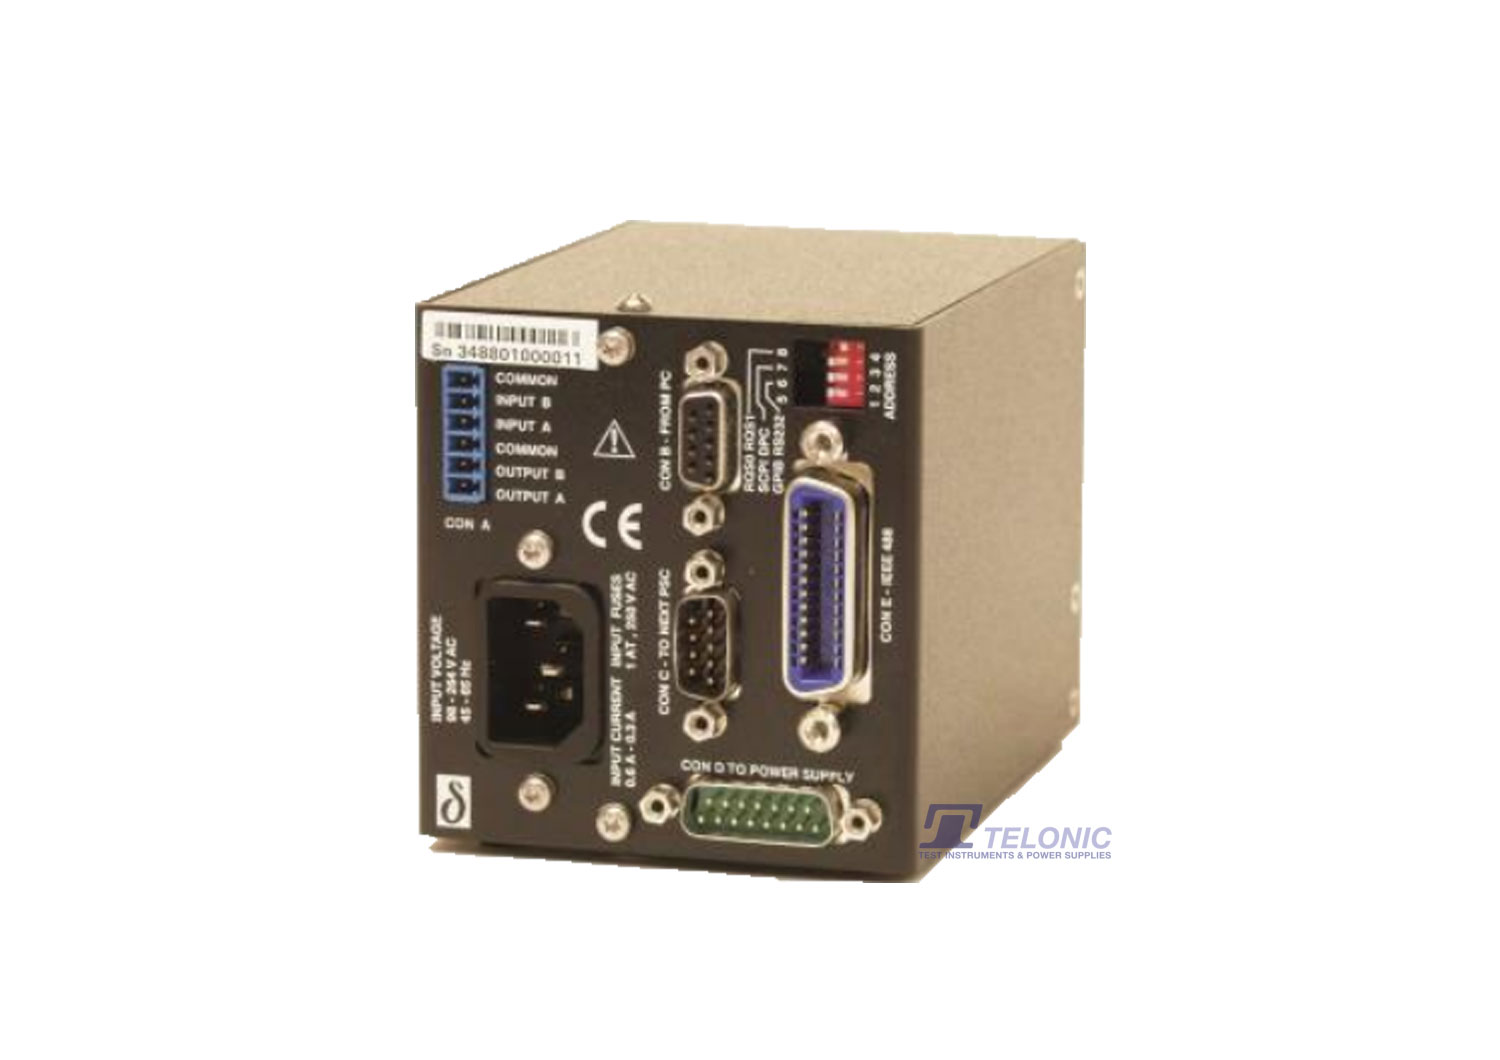 Connect To Analogue, PSC-488, IEEE488 External Interface Option For SM1500